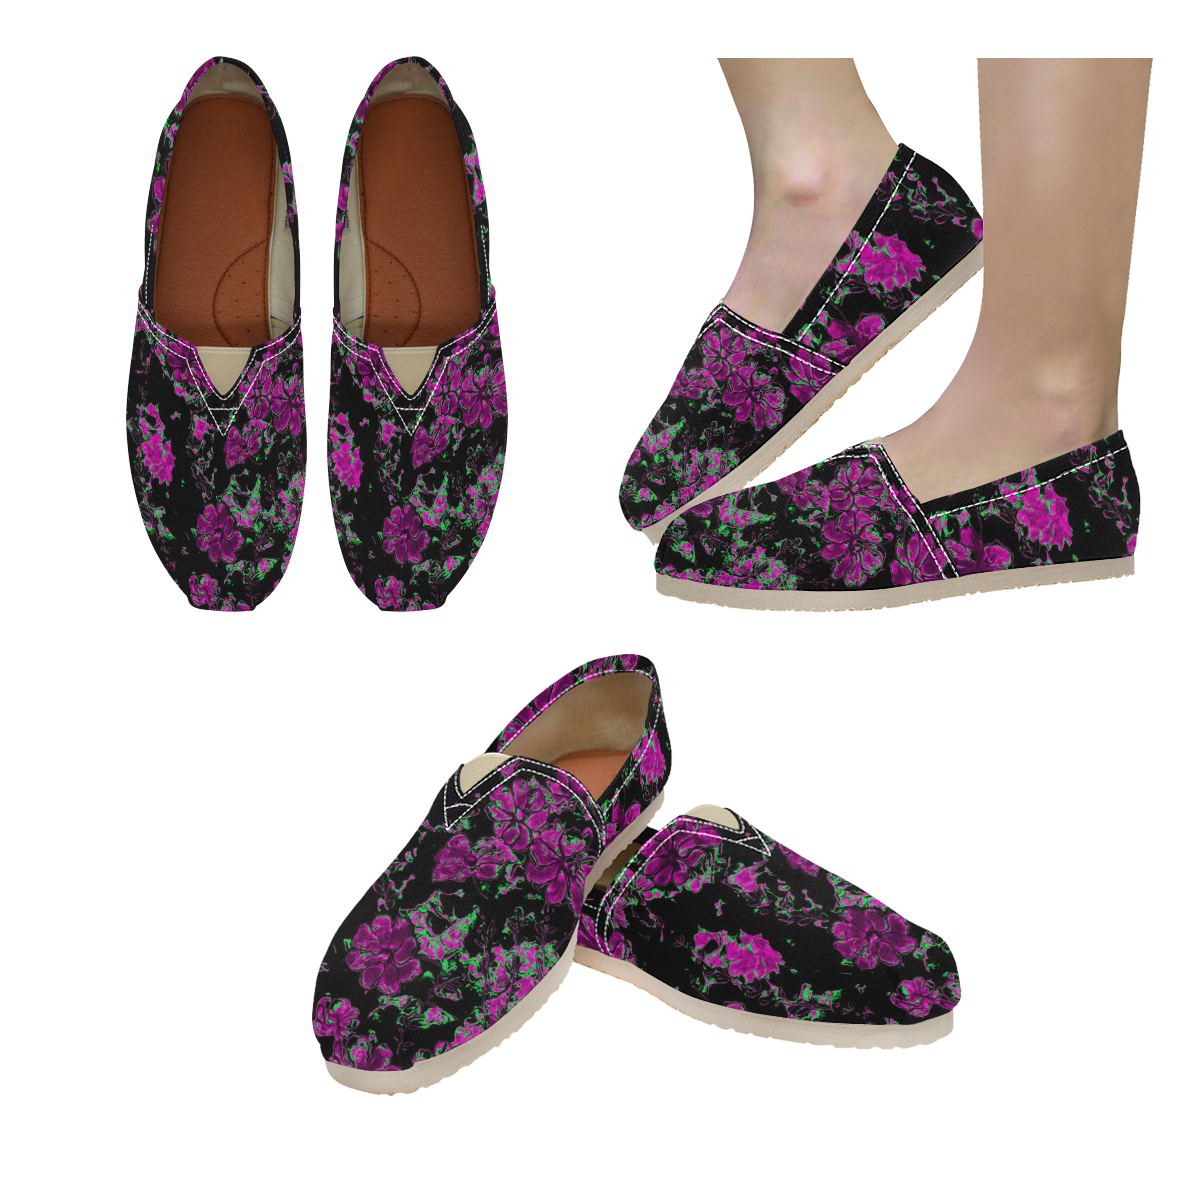 floral dreams 12 A by JamColors Women's Classic Canvas Slip-On (Model 1206)